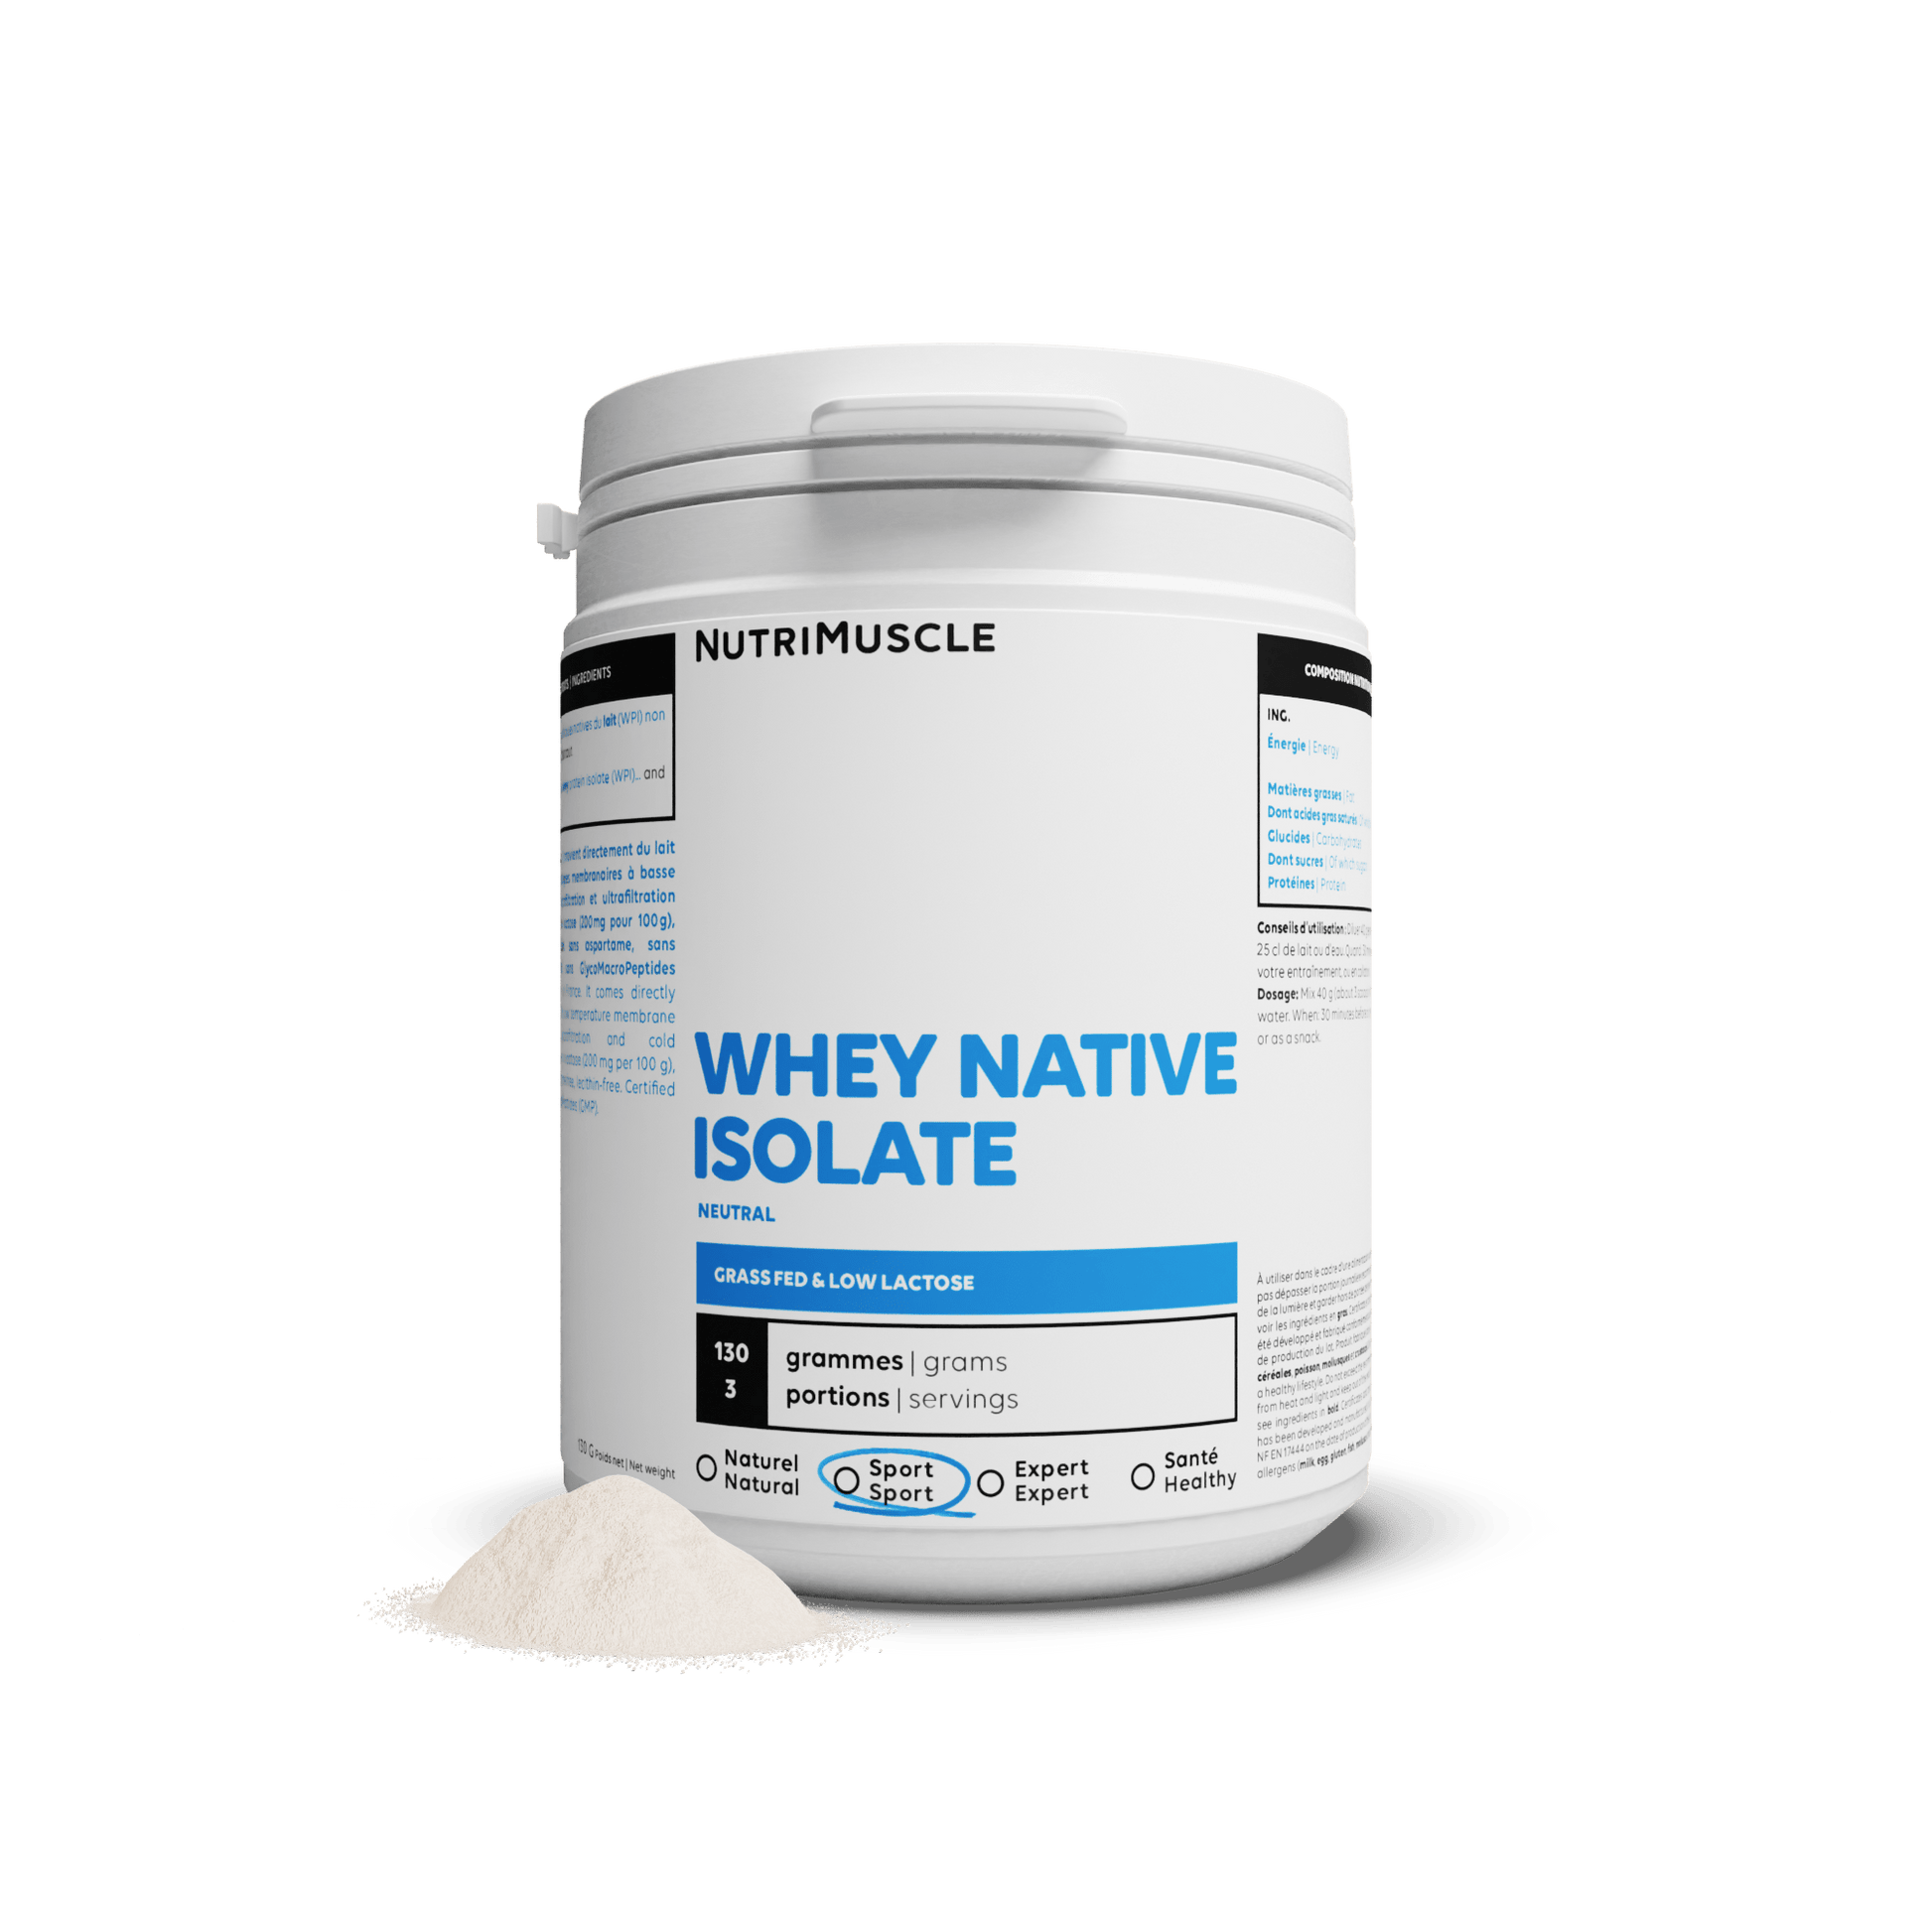 Nutrimuscle Protéines Nature / 130 g Whey Native Isolate (Low lactose)